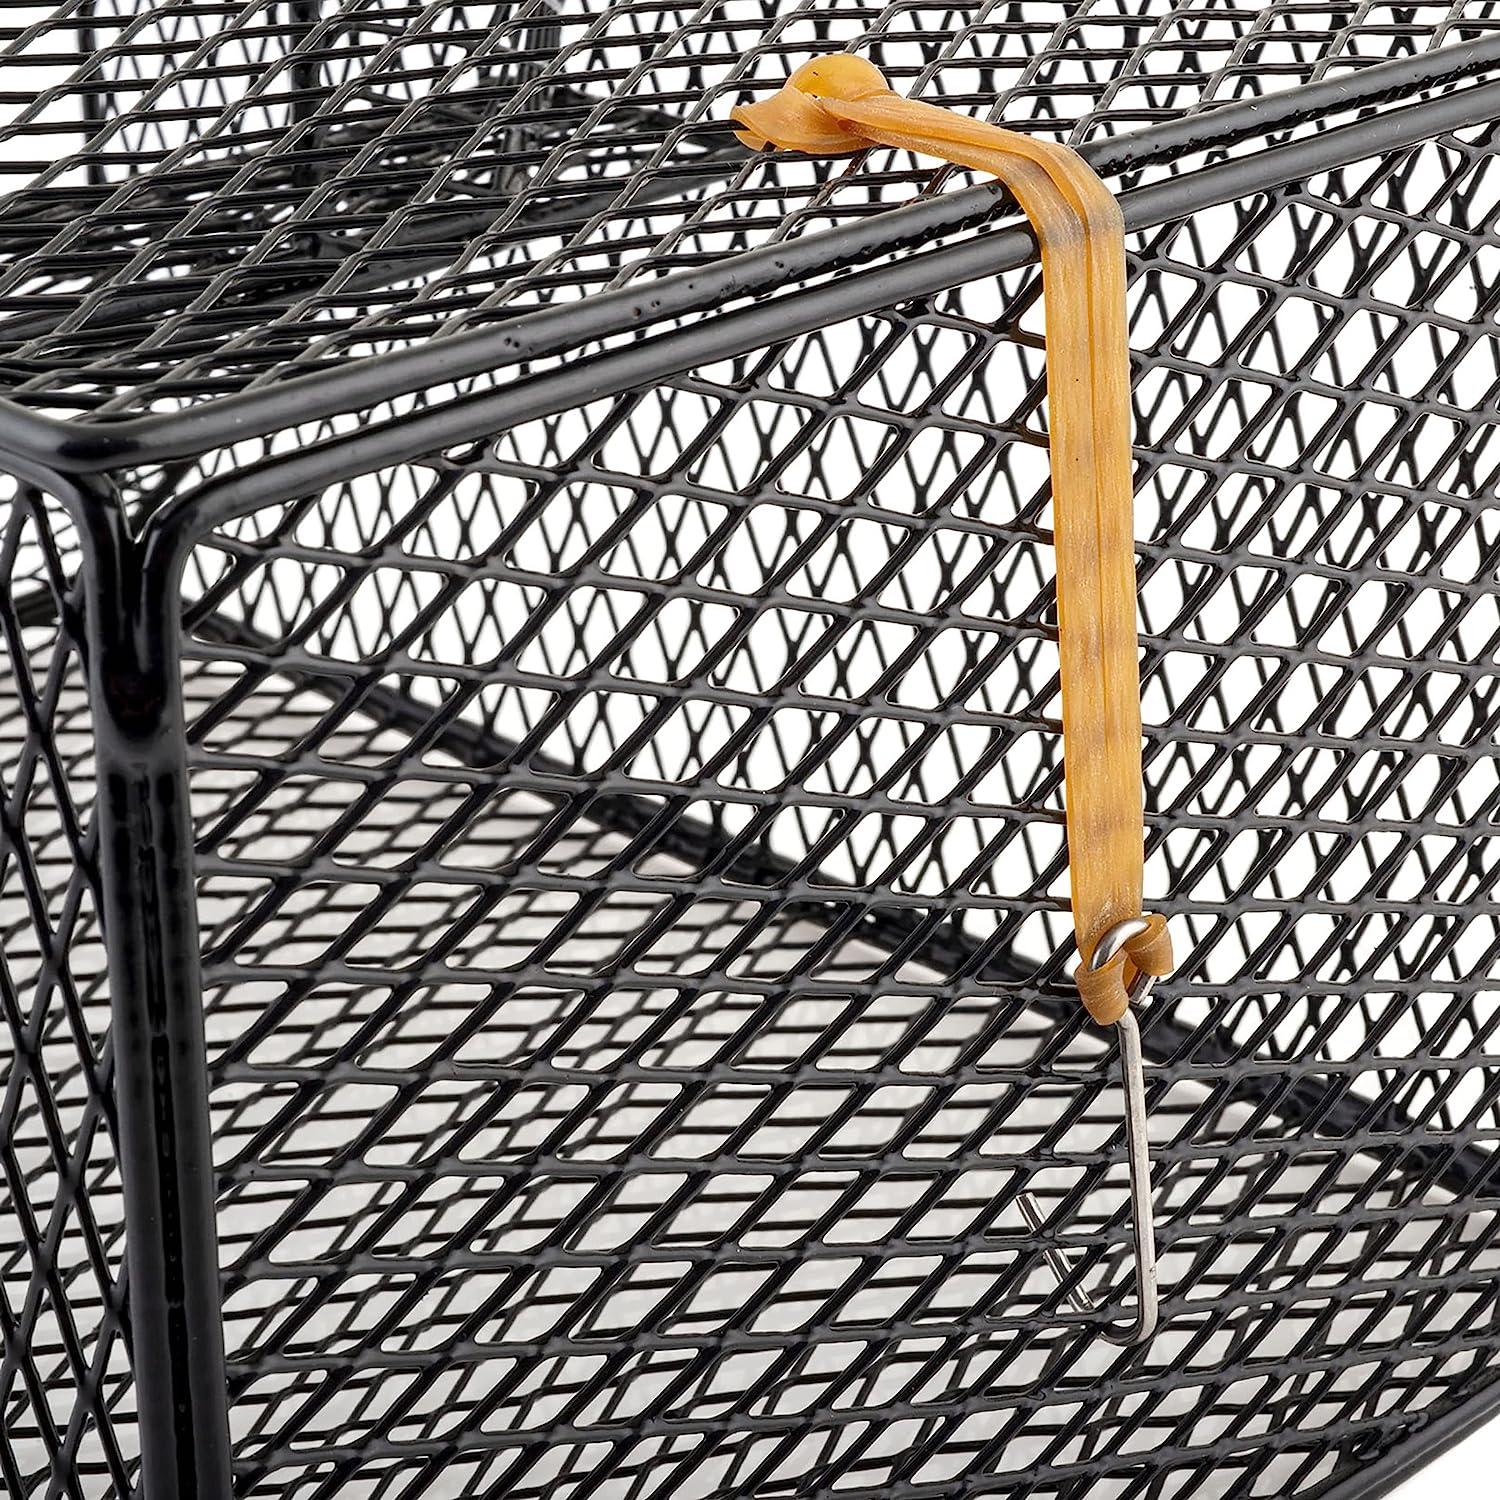 SOUTH BEND Wire Minnow Trap – Durable Corrosion Resistant Fishing Accessory